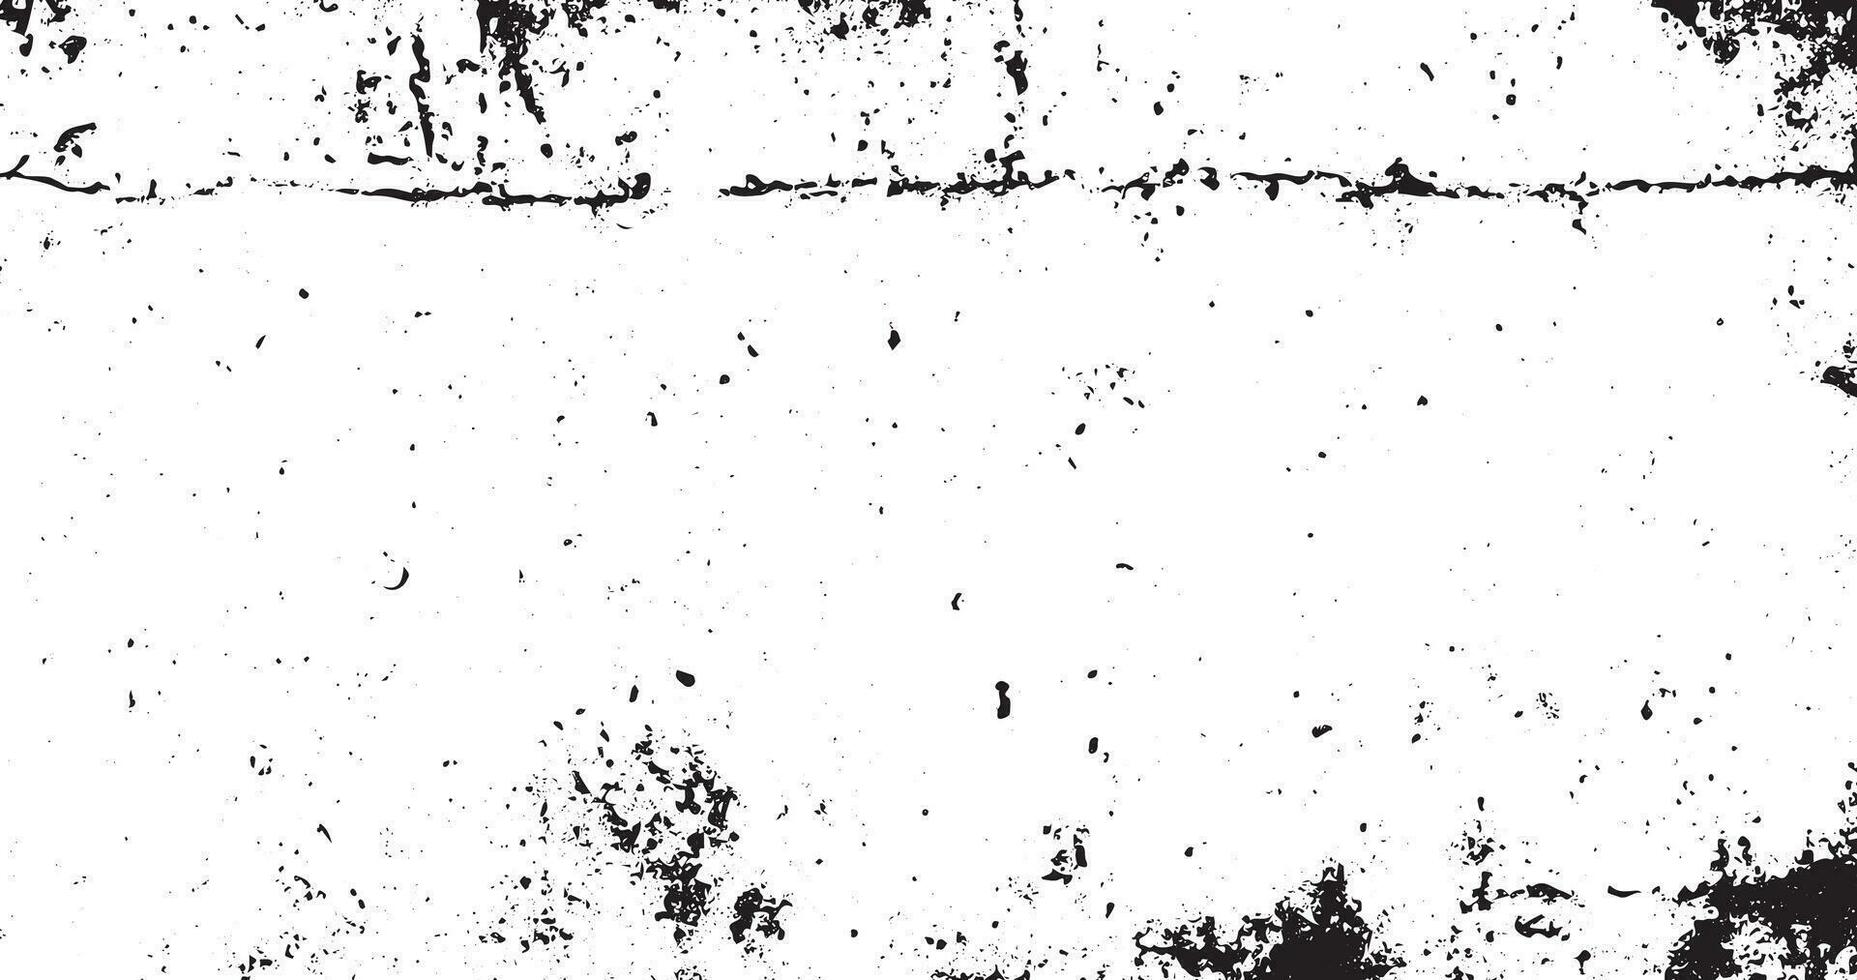 grunge texture.Overlay illustration over any design to create grungy vintage effect and depth. For posters, banners, retro and urban designs. vector